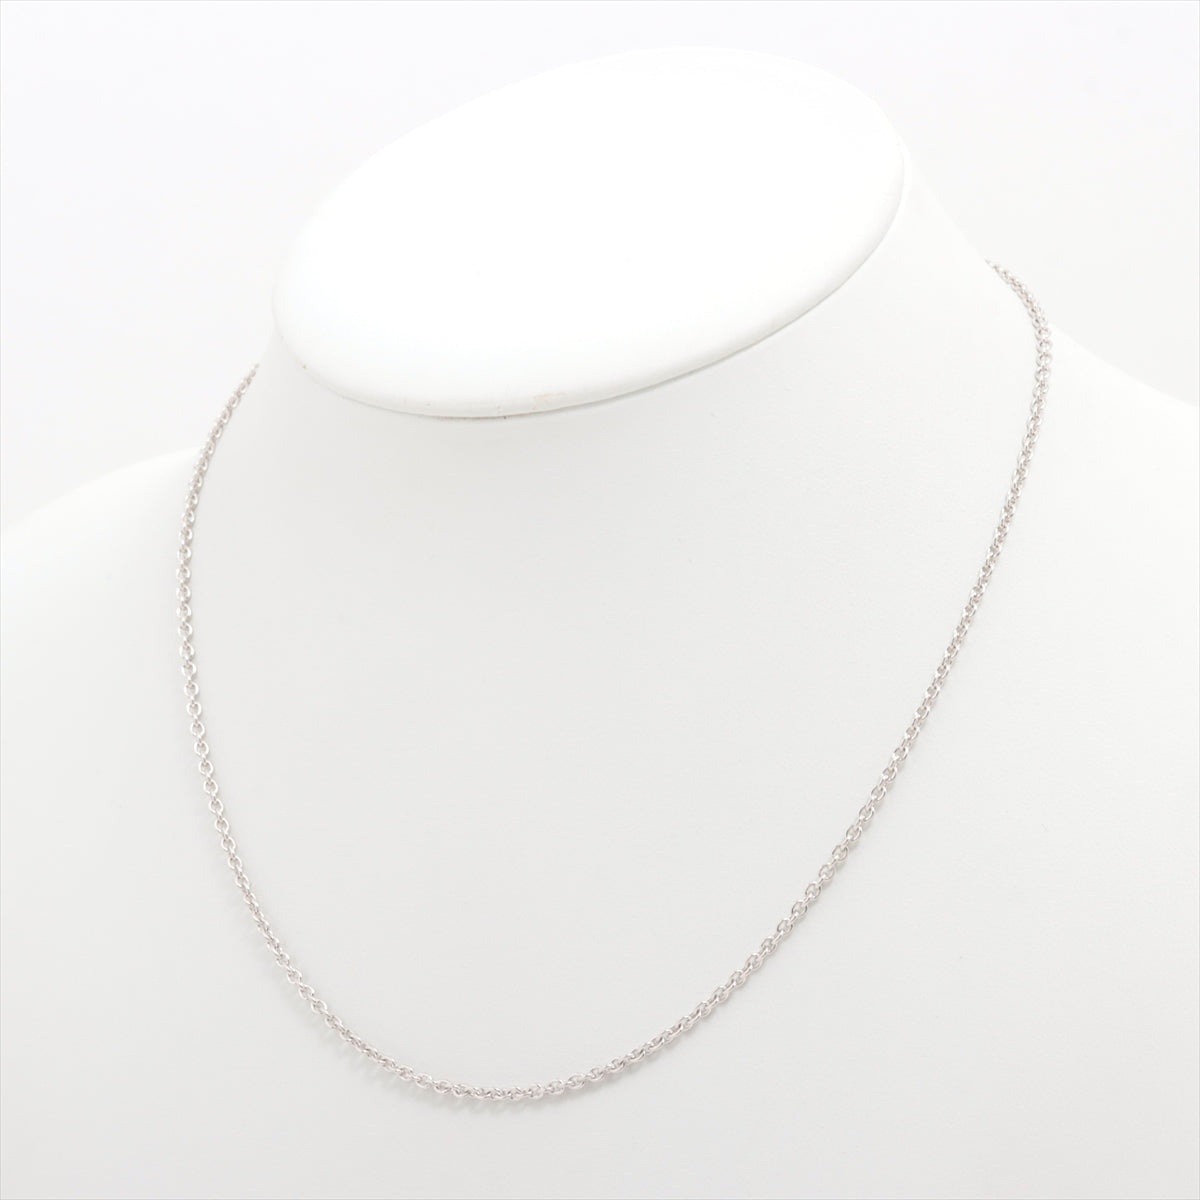 Cartier Necklace chain 750(WG) 7.2g